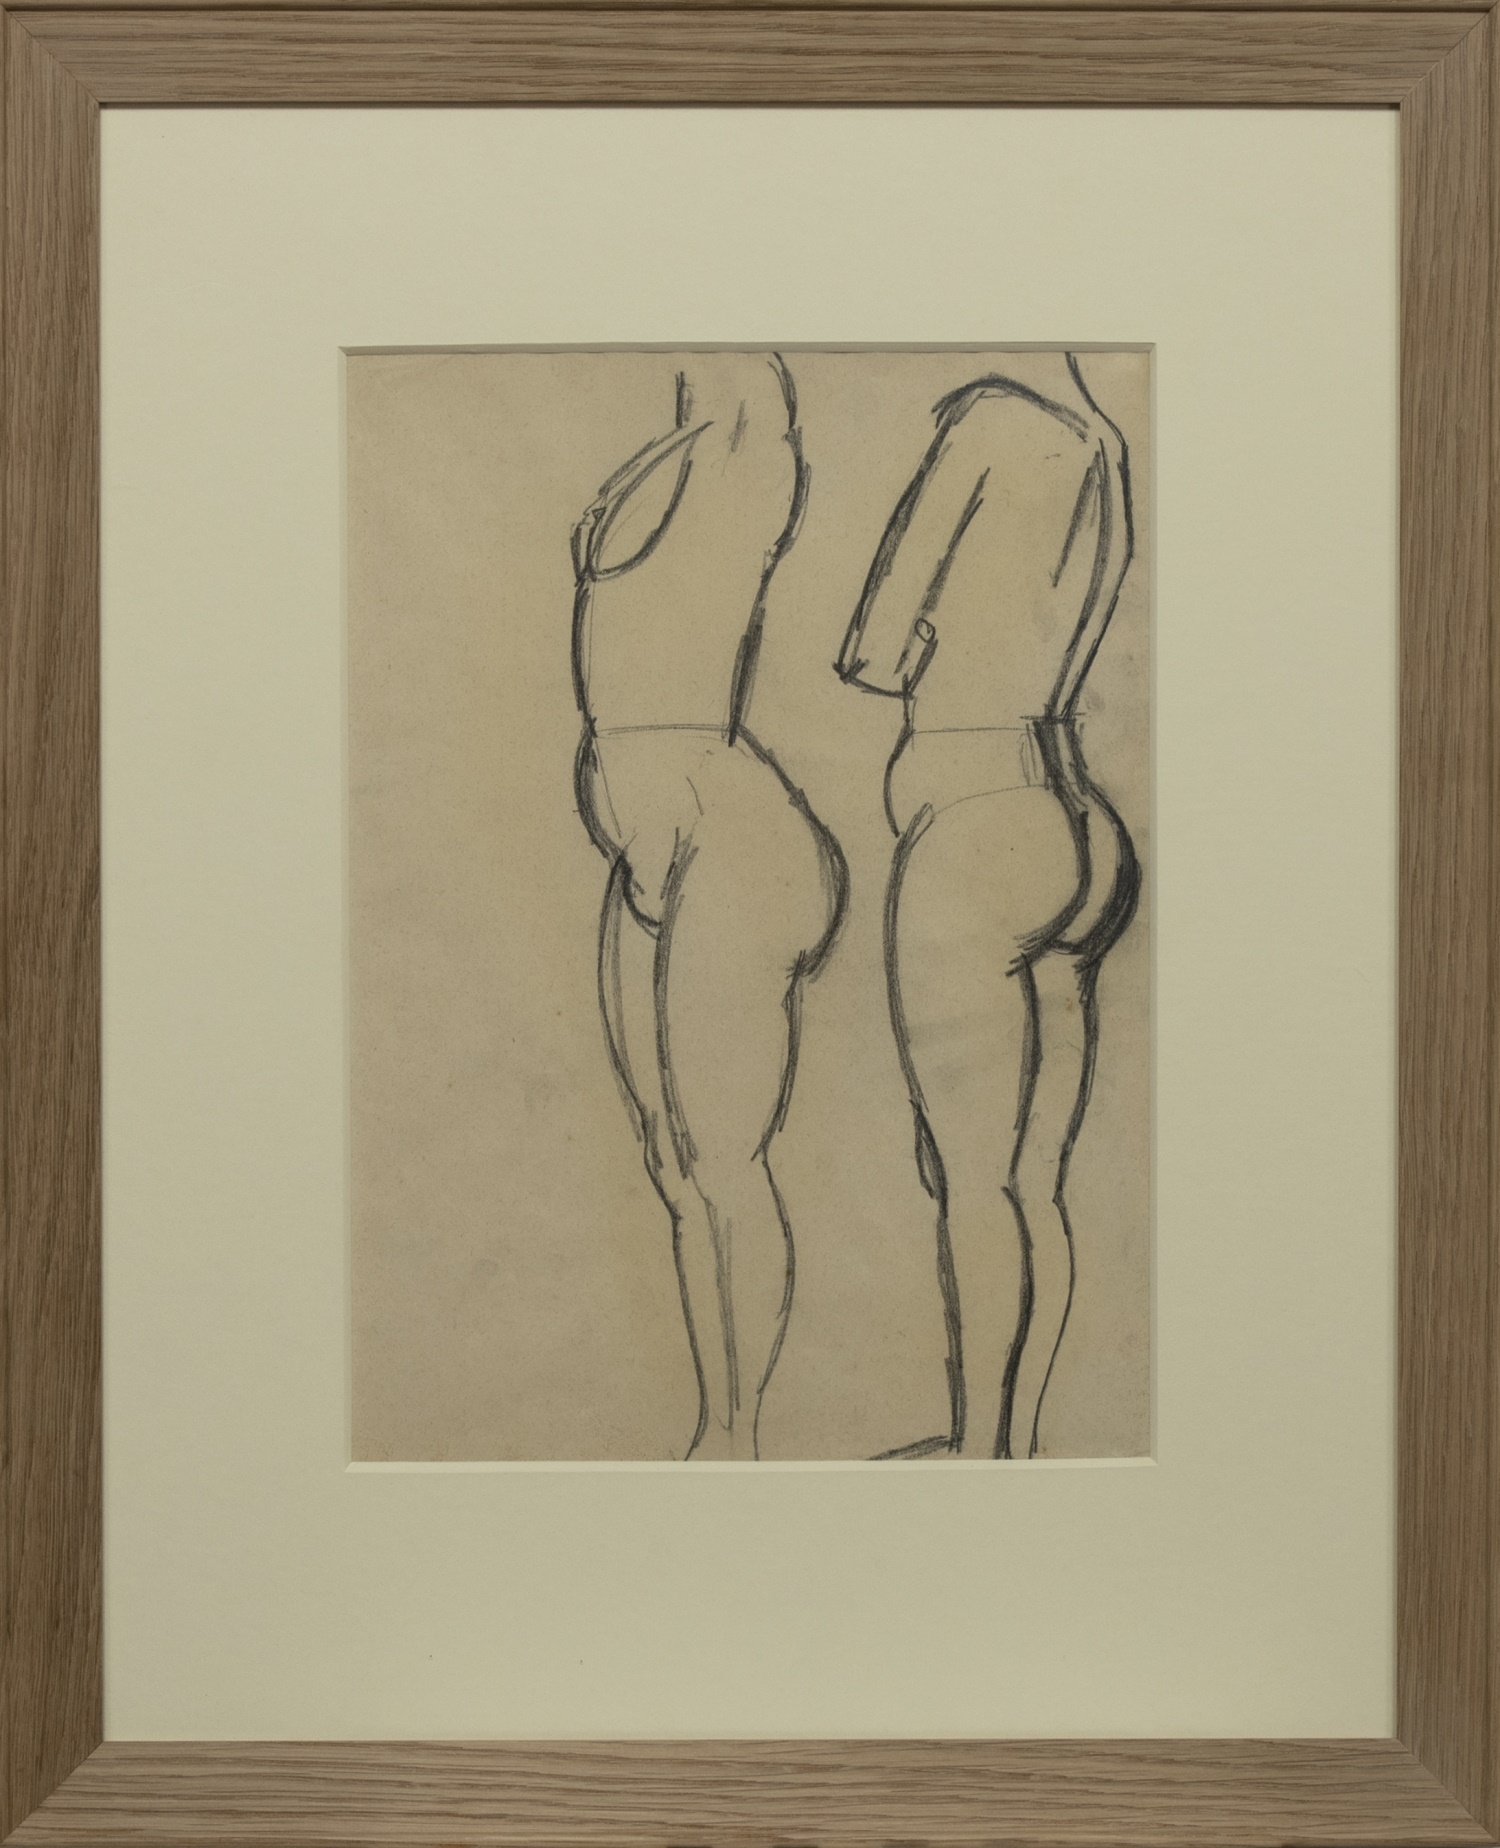 TWO STANDING NUDES, A SKETCH BY JOHN DUNCAN FERGUSSON